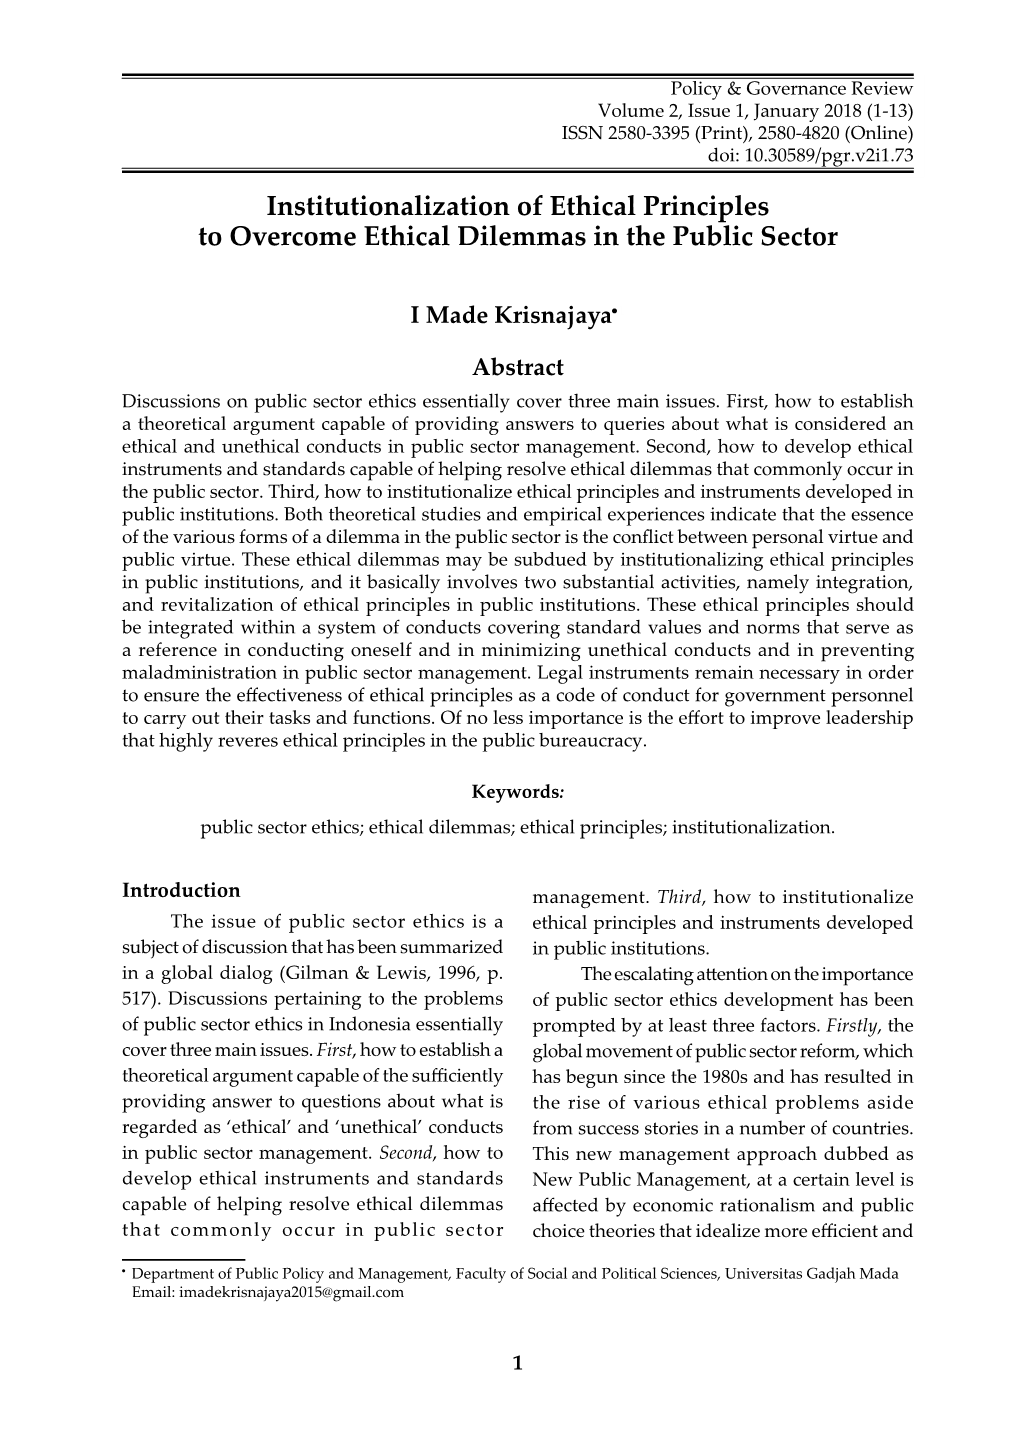 Institutionalization of Ethical Principles to Overcome Ethical Dilemmas in the Public Sector